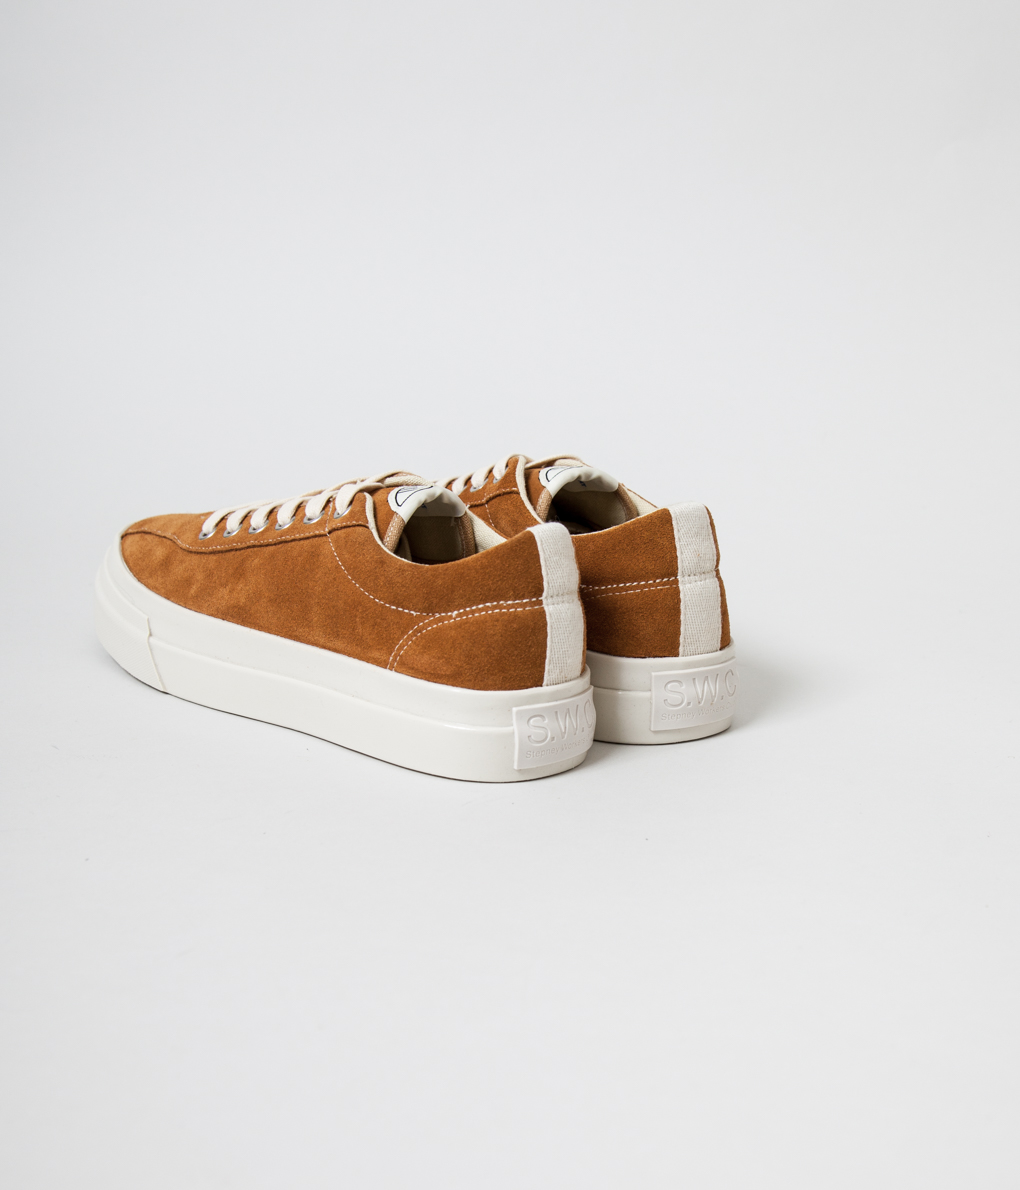 New Arrival “S.W.C (Stepney Workers Club) /DELLOW SUEDE SNEAKERS” |  well-made by MAIDENS SHOP